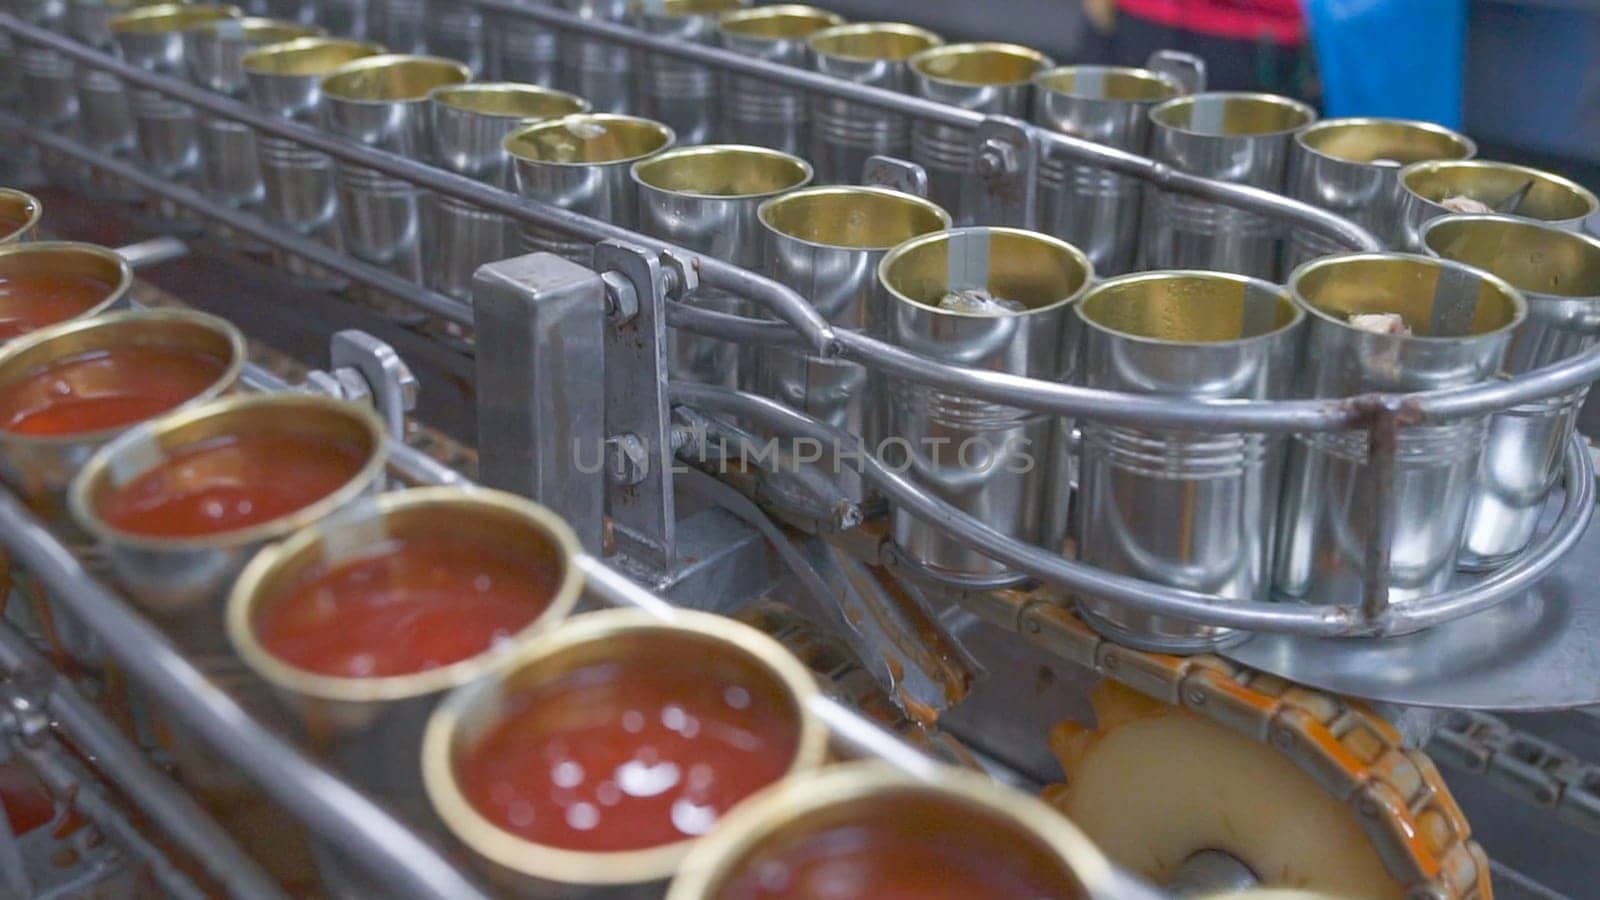 Canned fish factory. Food industry.  Many can of sardines on a conveyor belt. Sardines in red tomato sauce in tinned cans at food factory. Food processing production line. Food manufacturing industry. by Fahroni